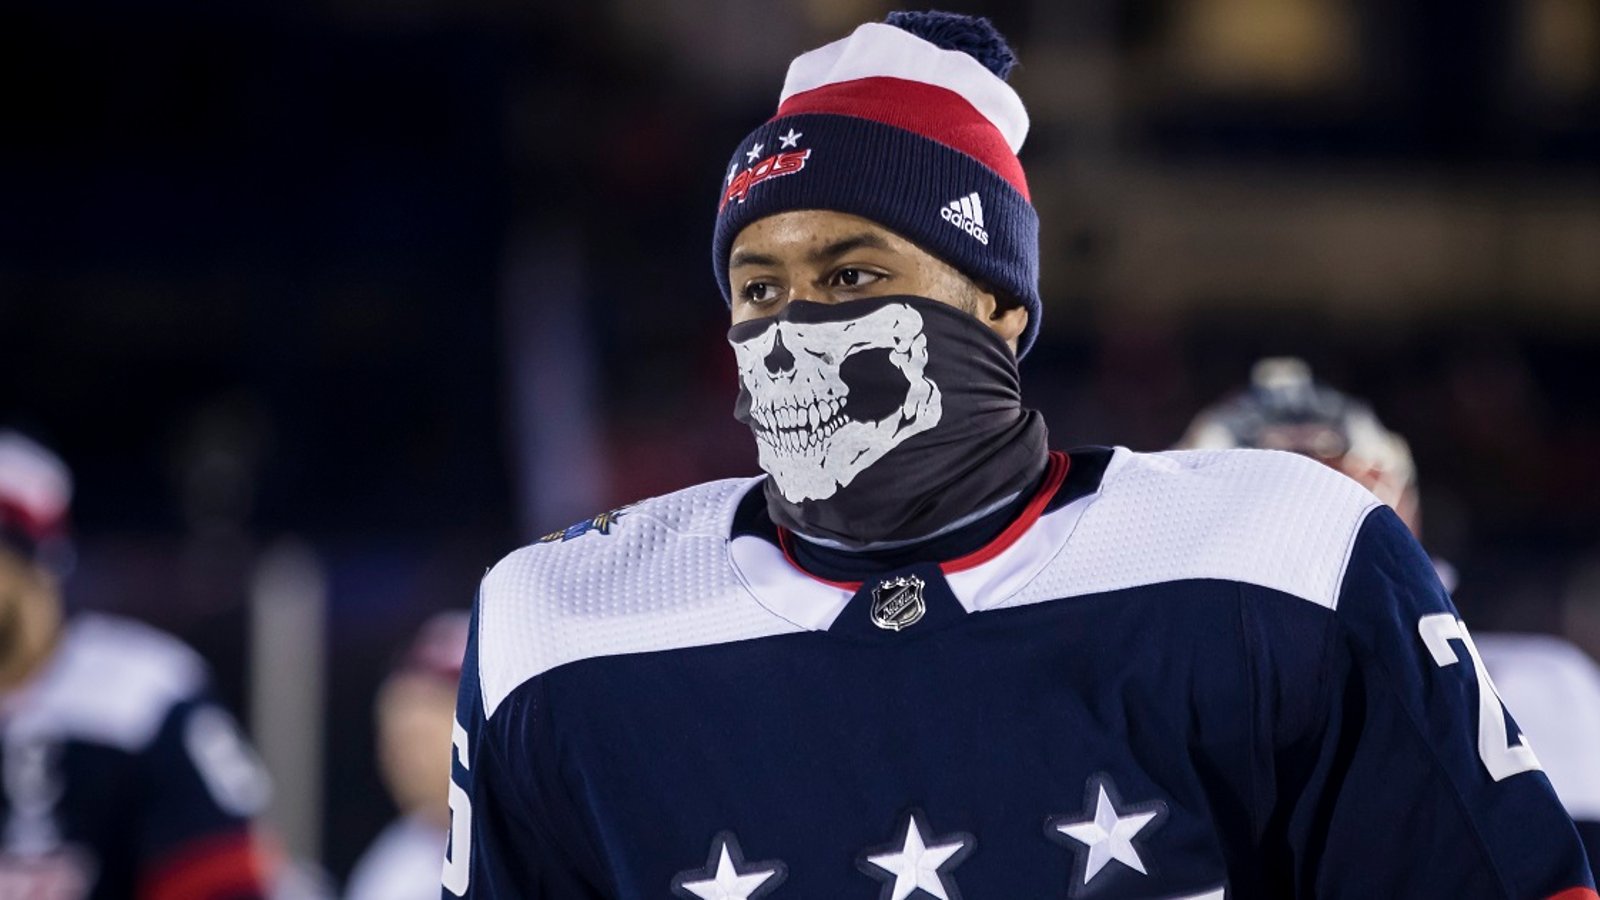 Rumor: Devante Smith-Pelly coming back to play in North America.